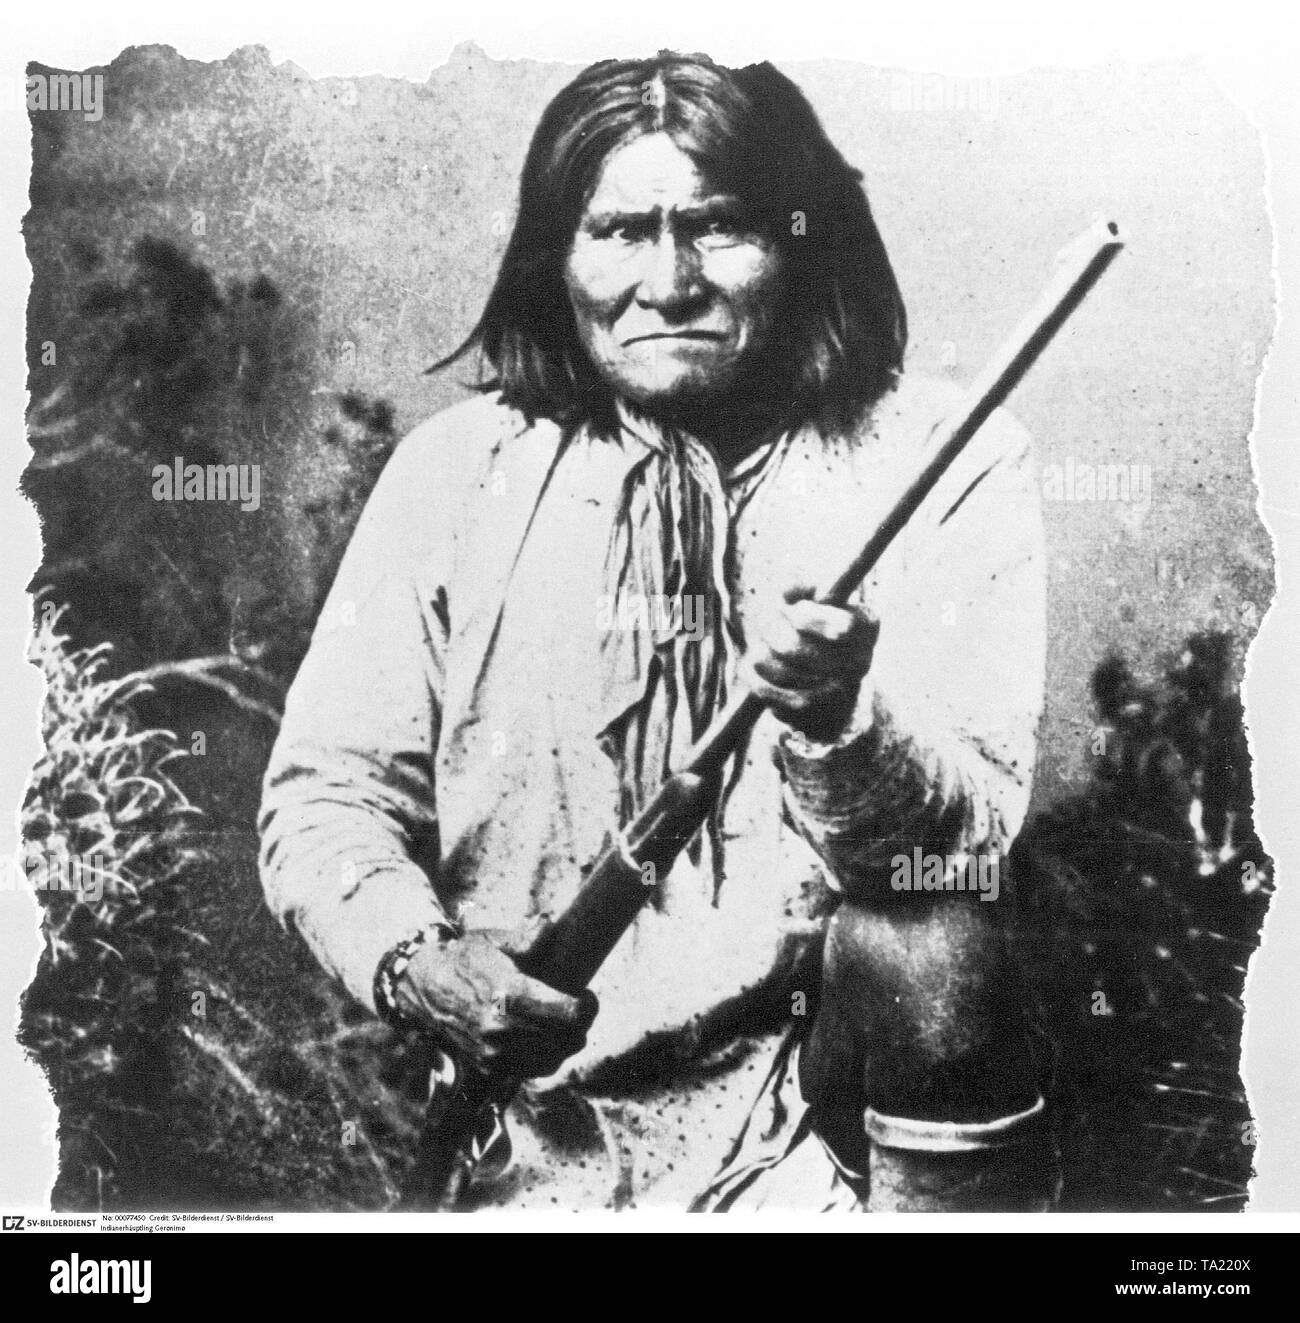 The Apache chief Geronimo was one of the last dreaded Indian chiefs who fought for 30 years against the white settlers in the second half of the 19th century. Stock Photo